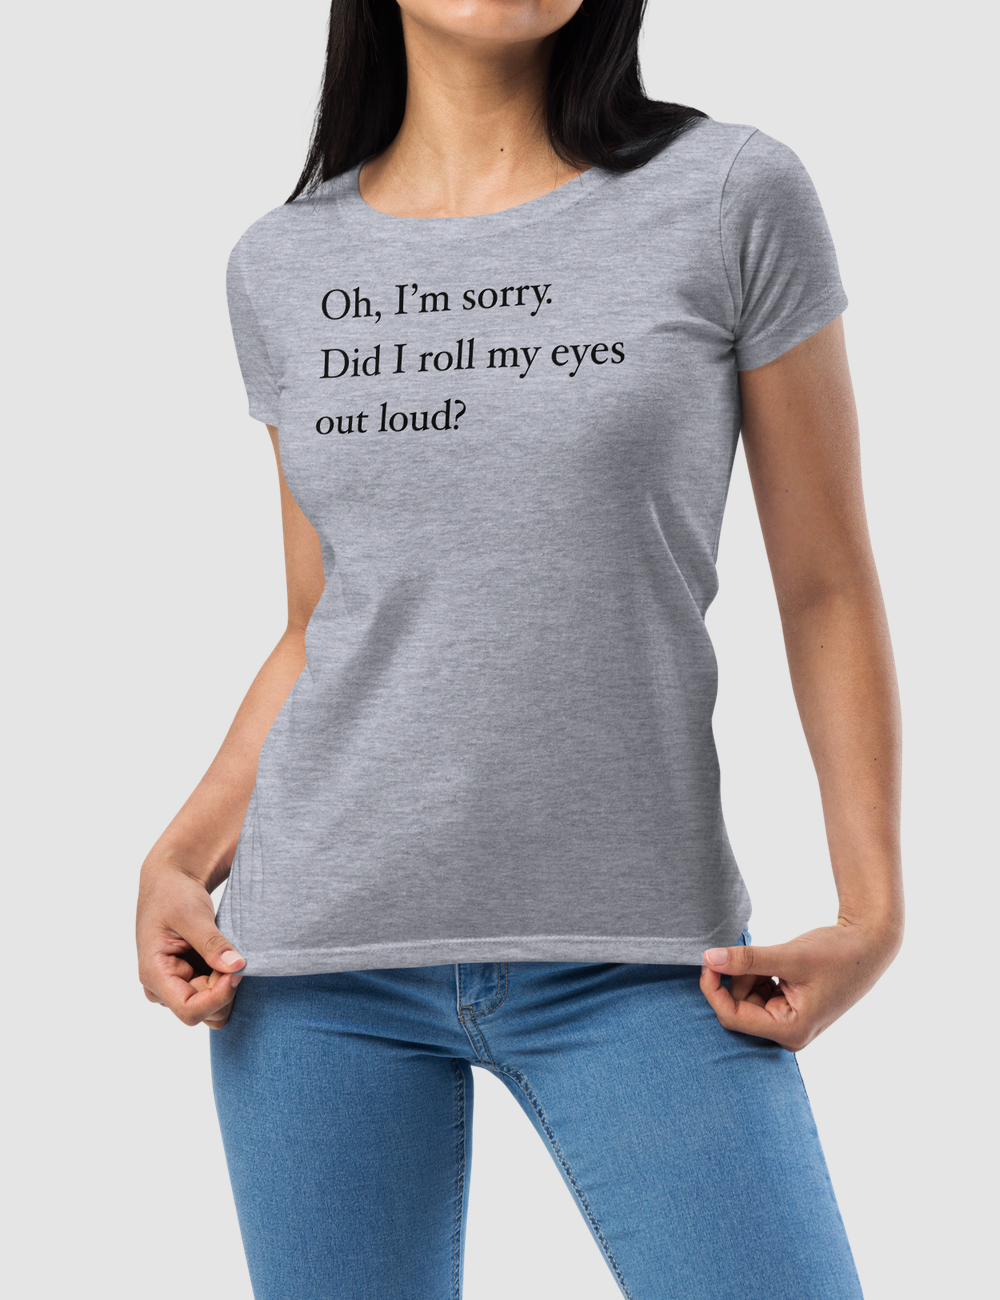 Rolling My Eyes Out Loud | Women's Fitted T-Shirt OniTakai